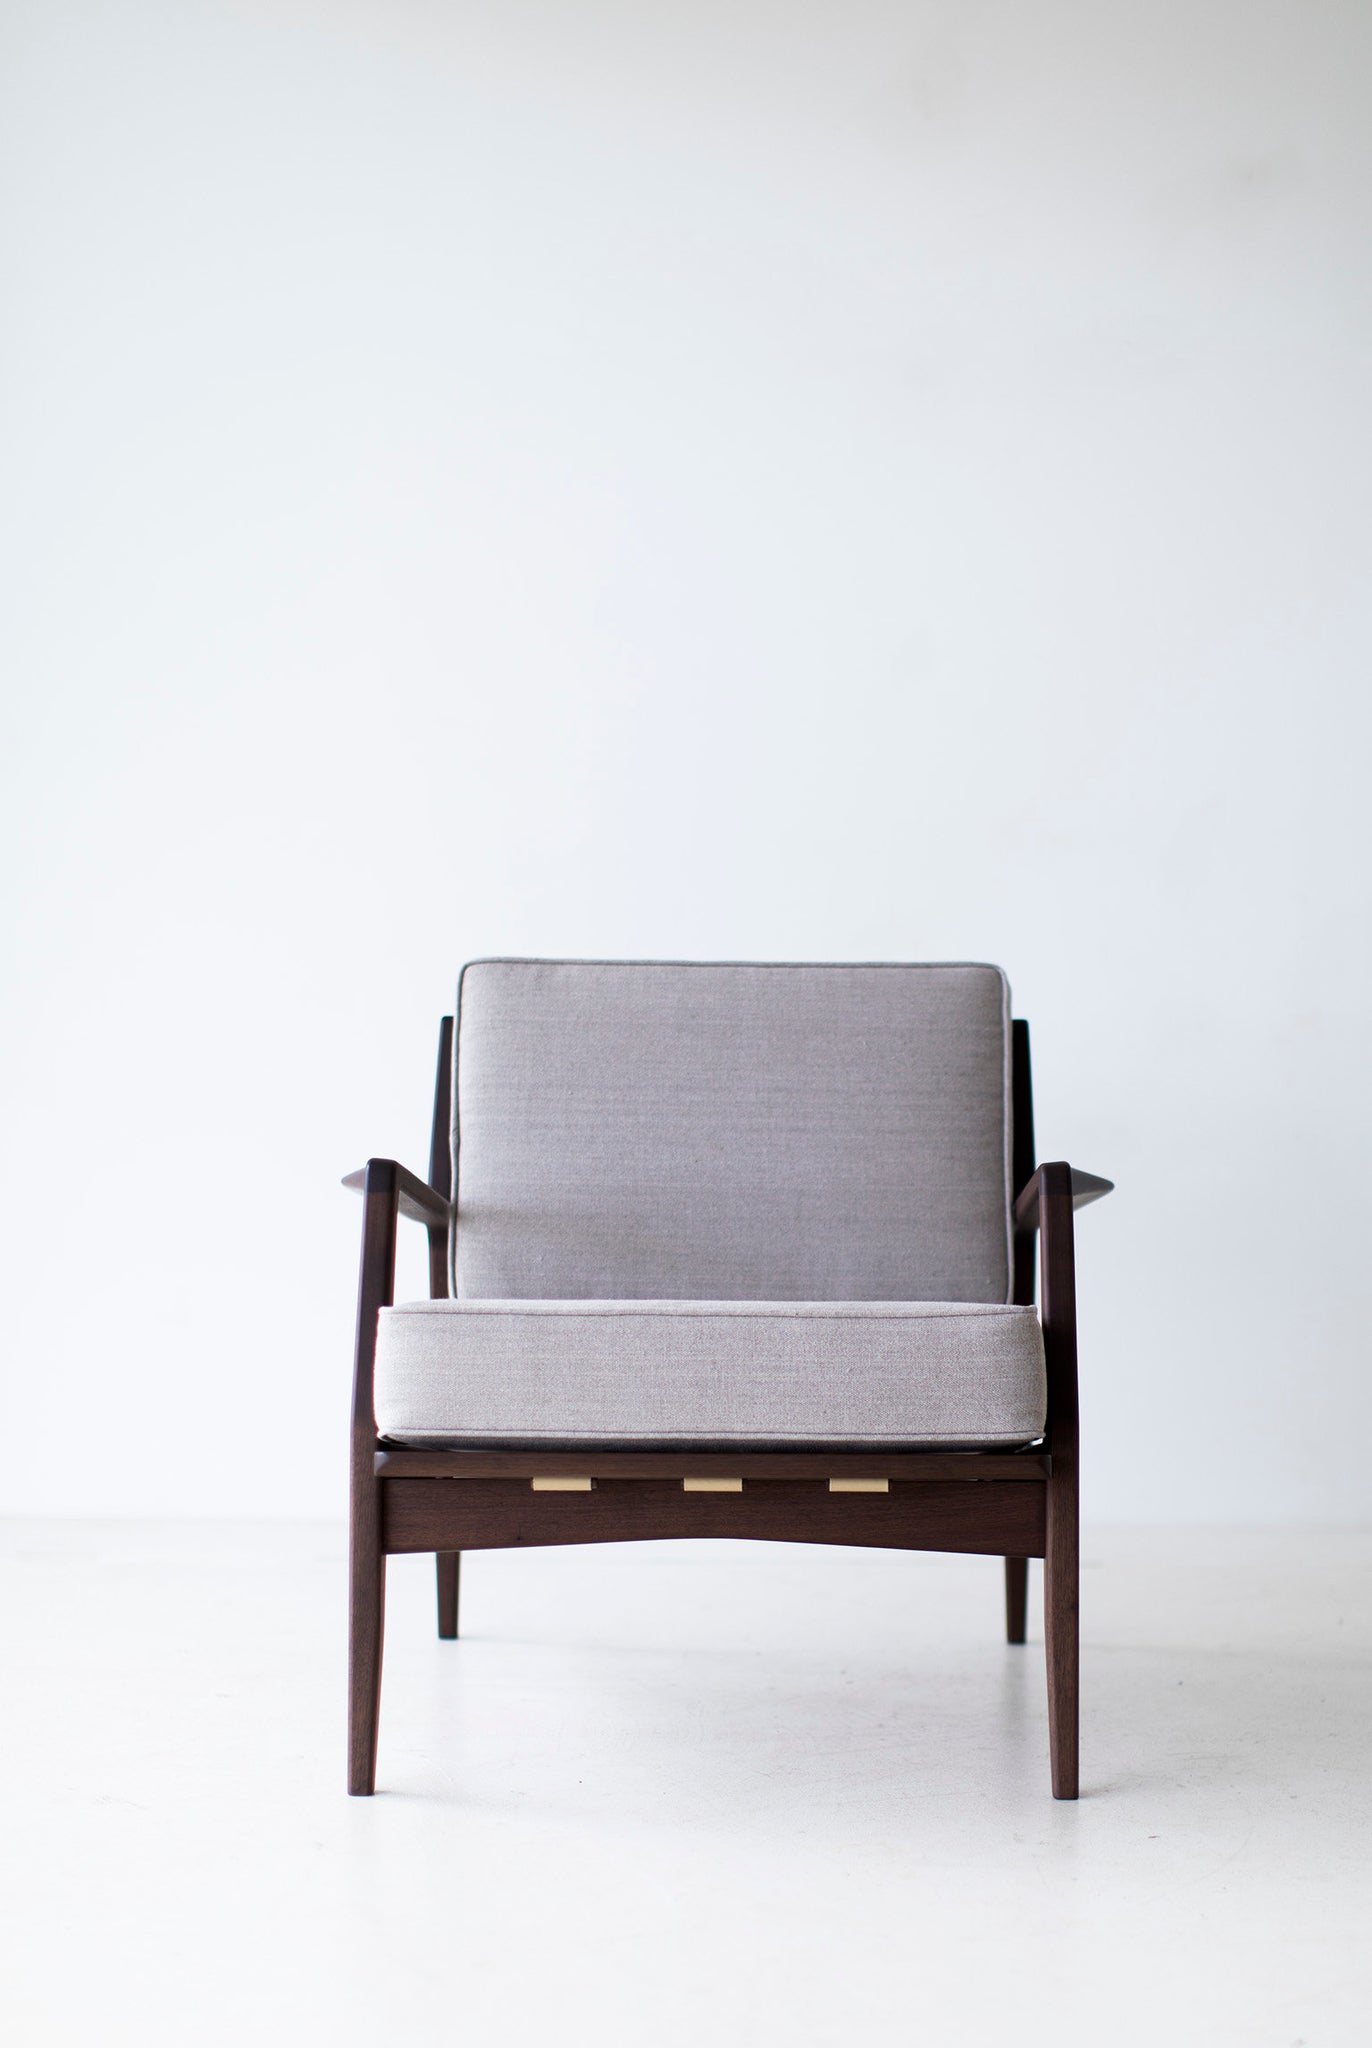 lawrence-peabody-lounge-chair-04